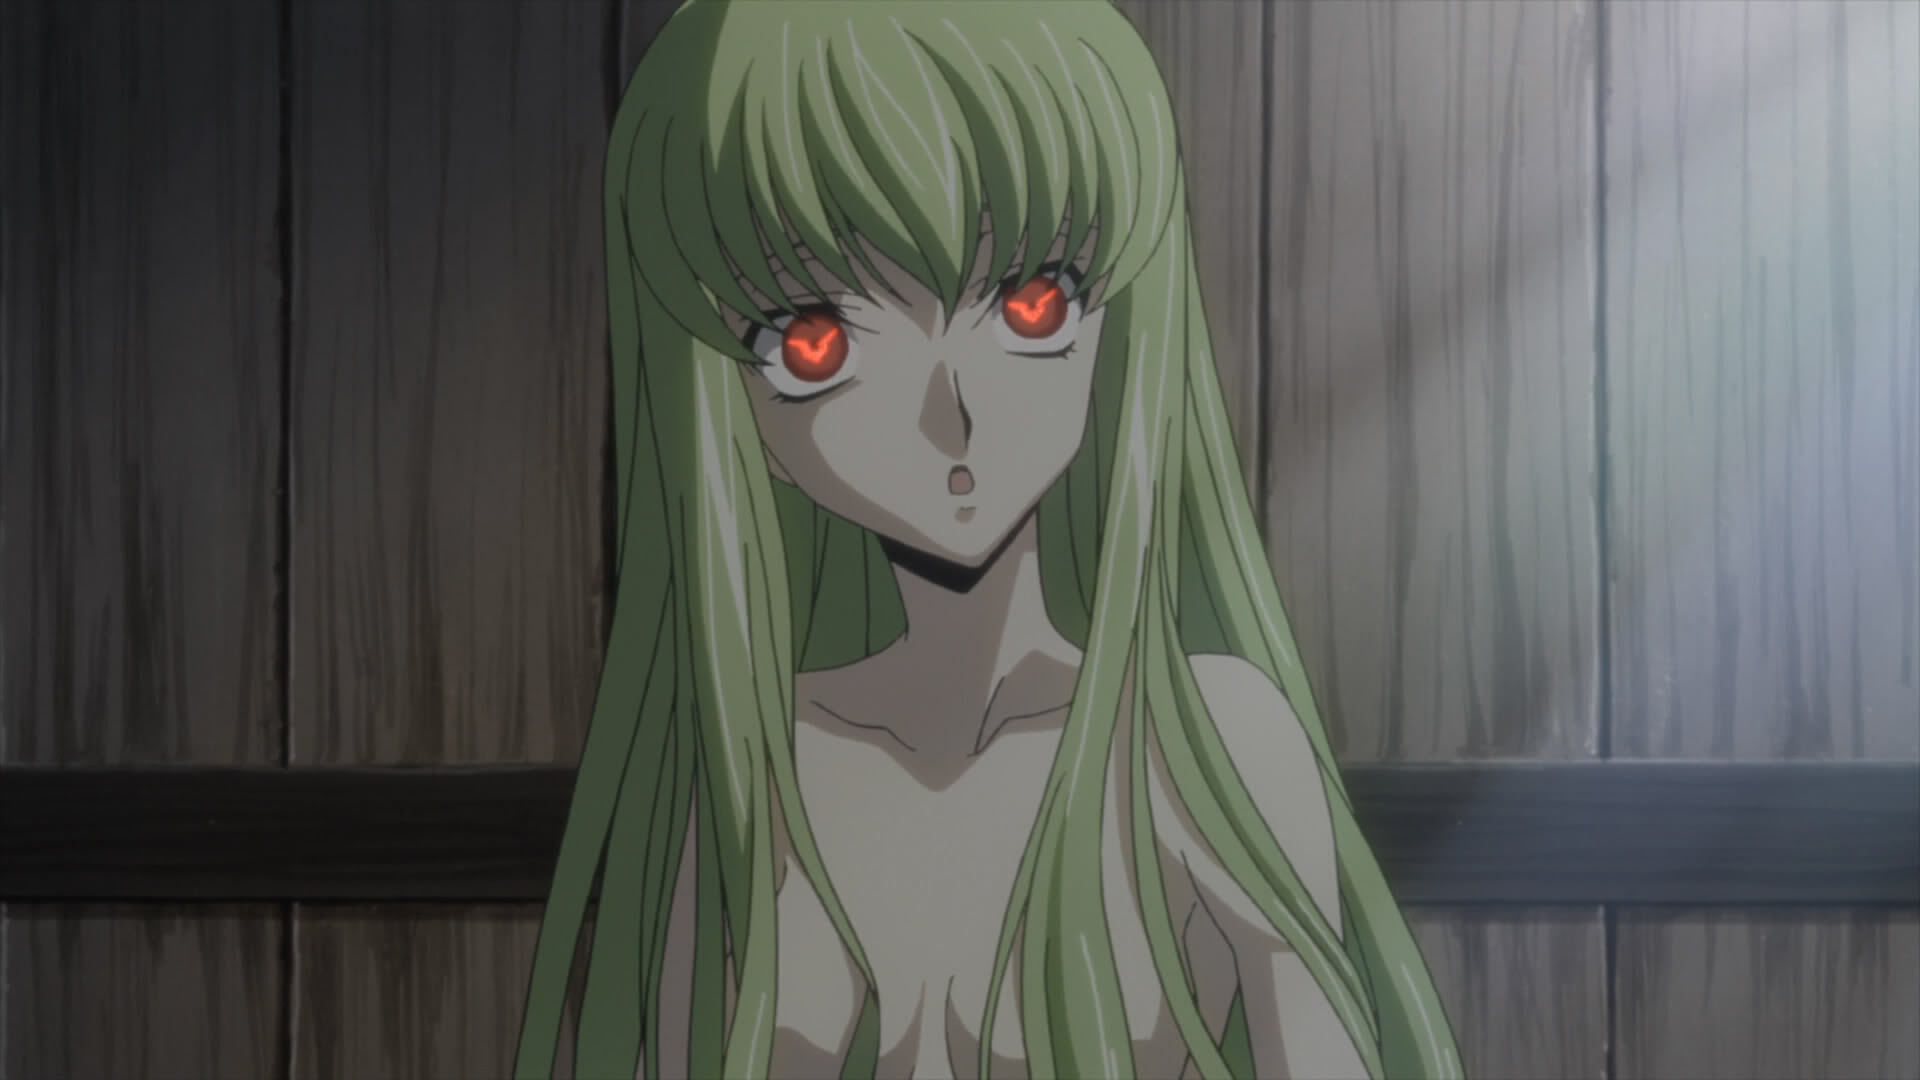 5 Reasons CC From Code Geass Is The Best Female Anime Character